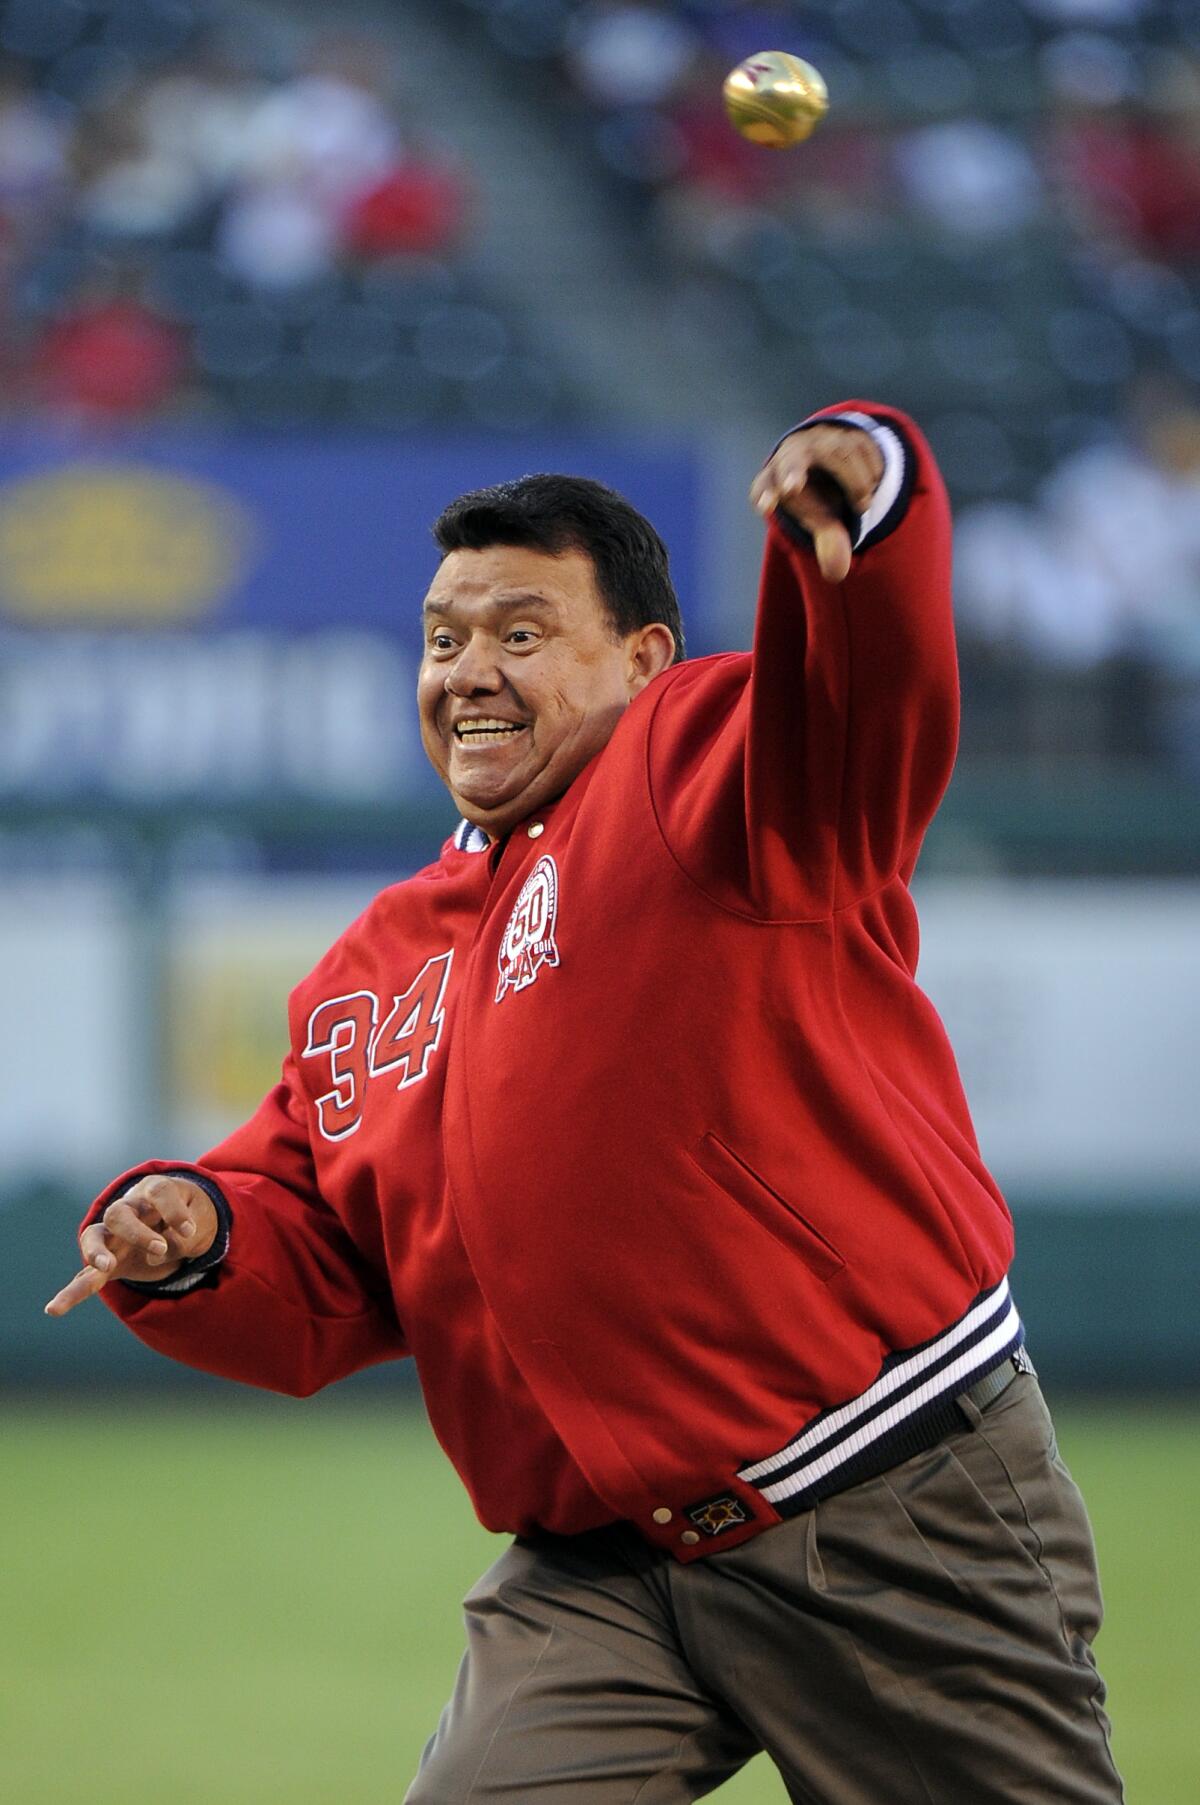 Former Dodgers and Angels pitcher Fernando Valenzuela throws out the ceremonial first pitch.